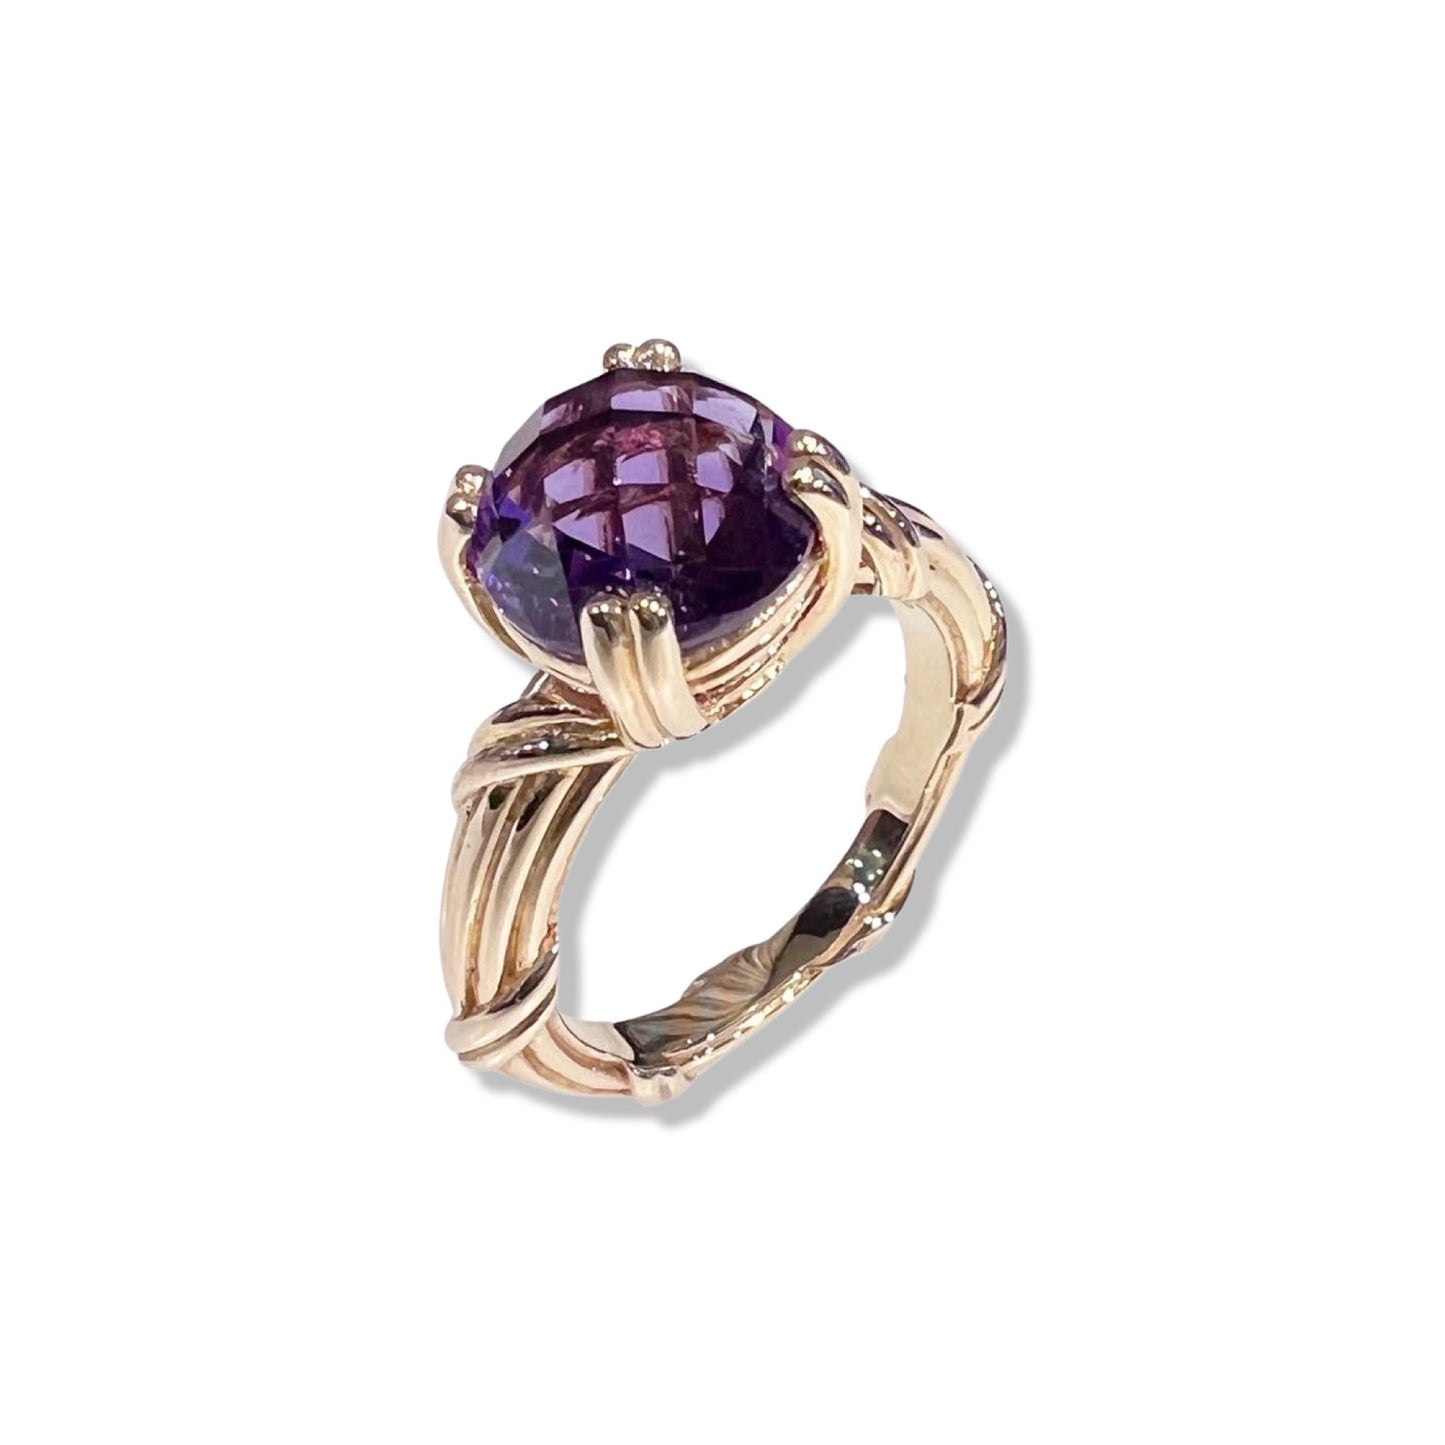 Fantasies Amethyst Cocktail Ring in 18K yellow gold 10mm